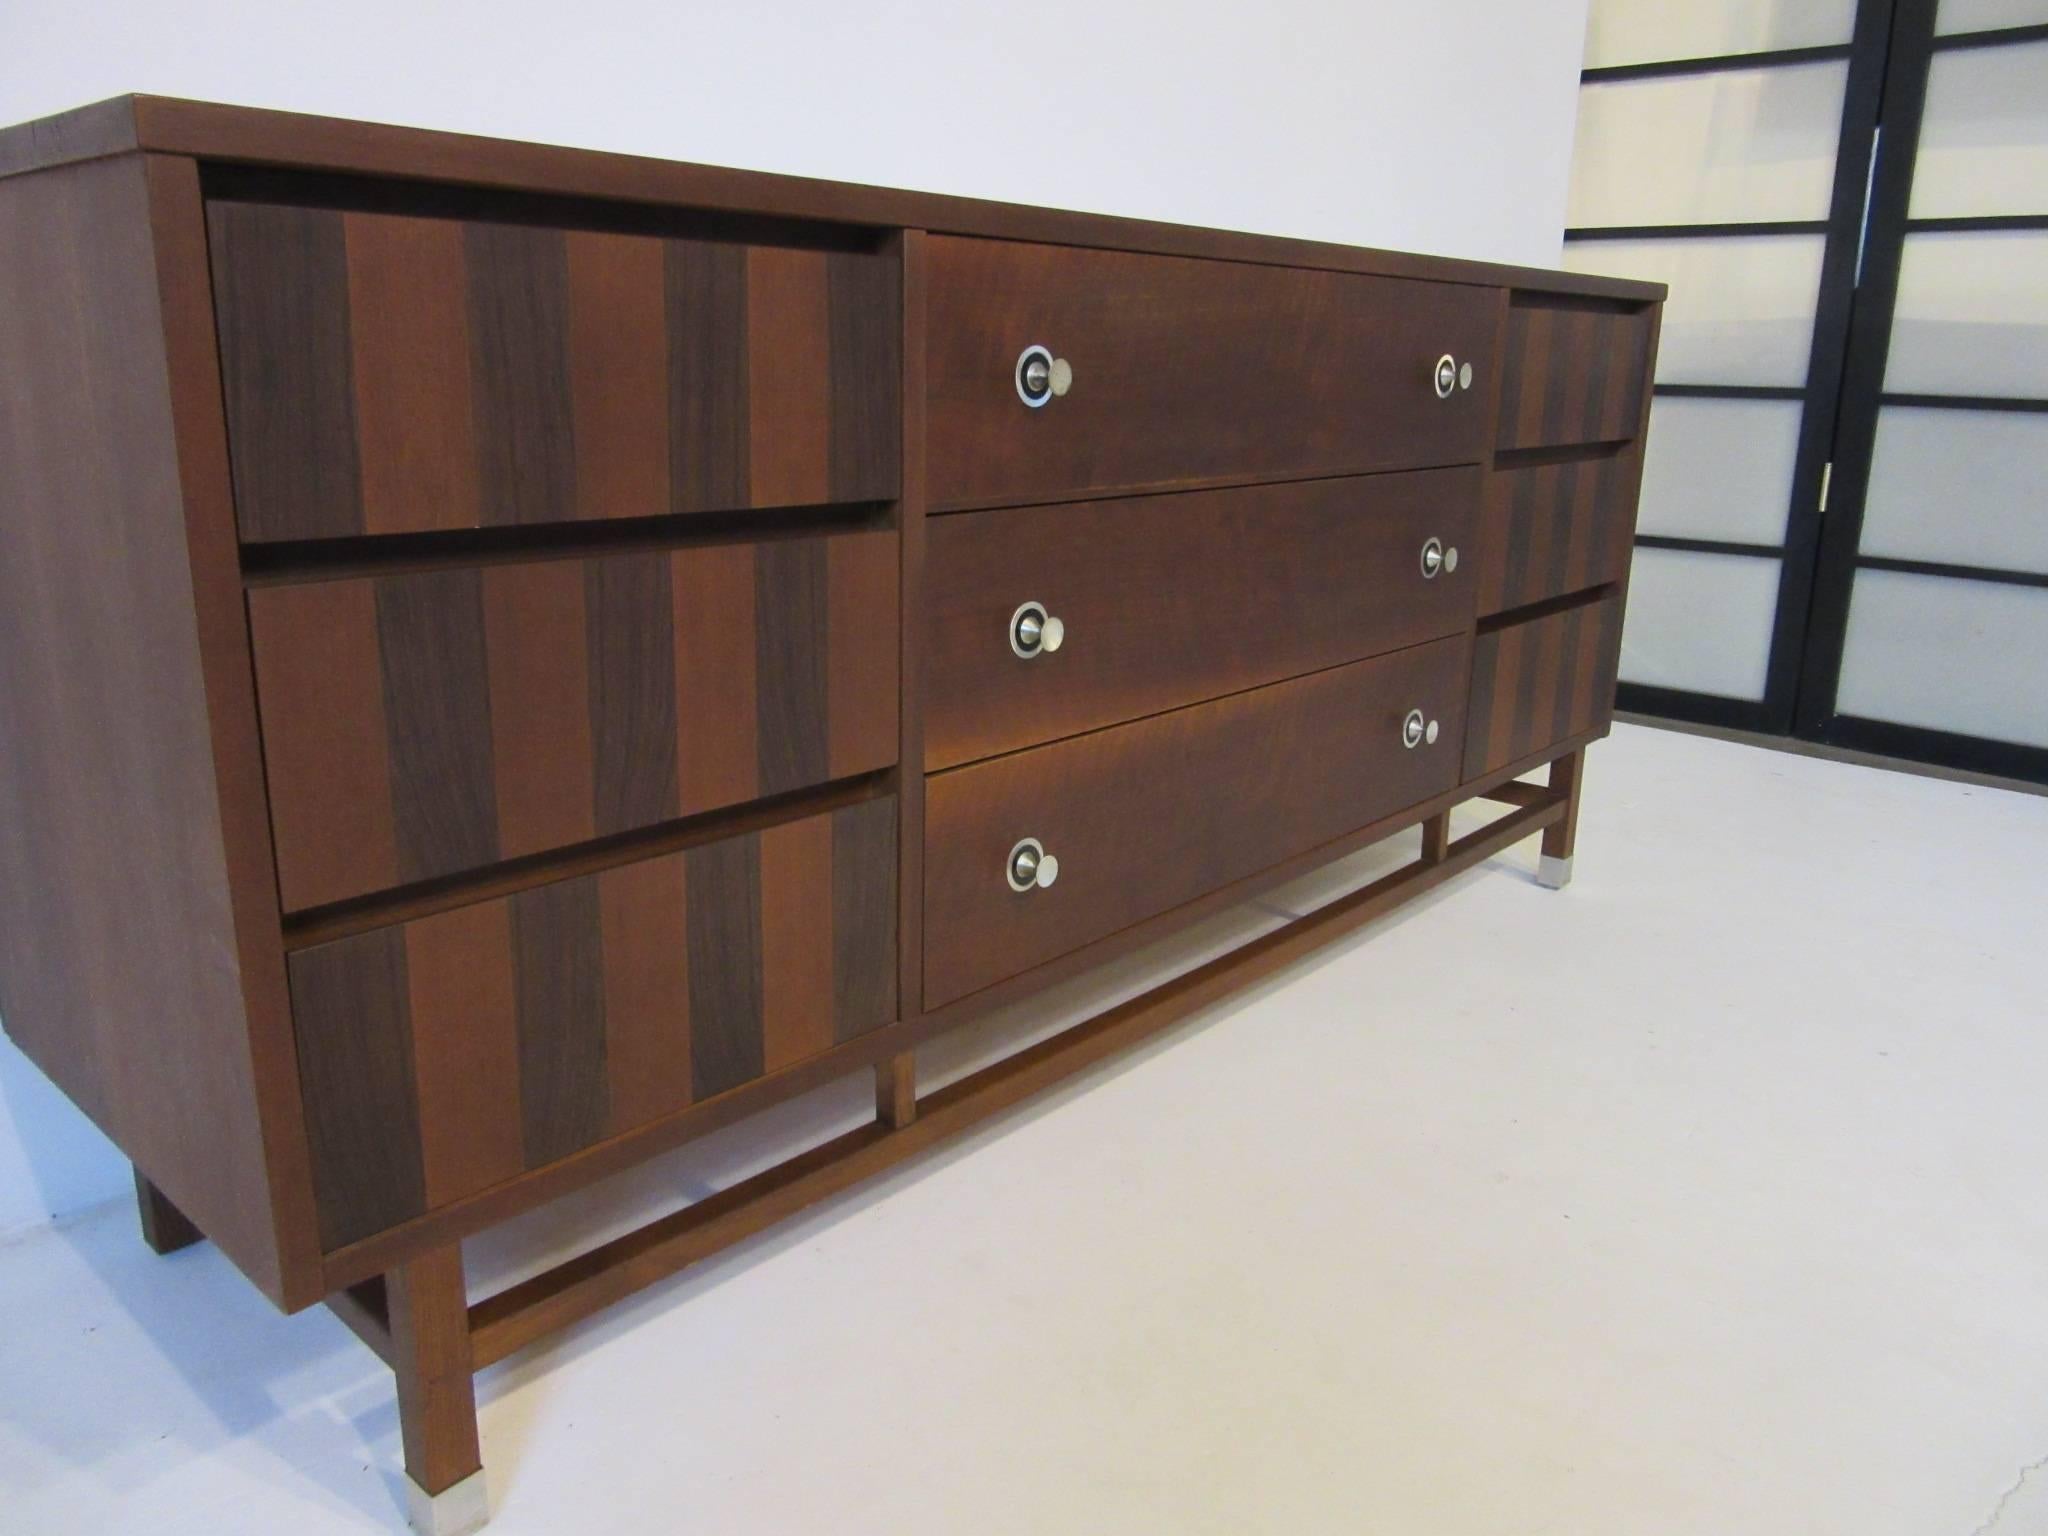 A midcentury nine-drawer dresser chest in dark walnut with rosewood details, spun aluminum pulls, lower stretches with matching aluminum leg caps.